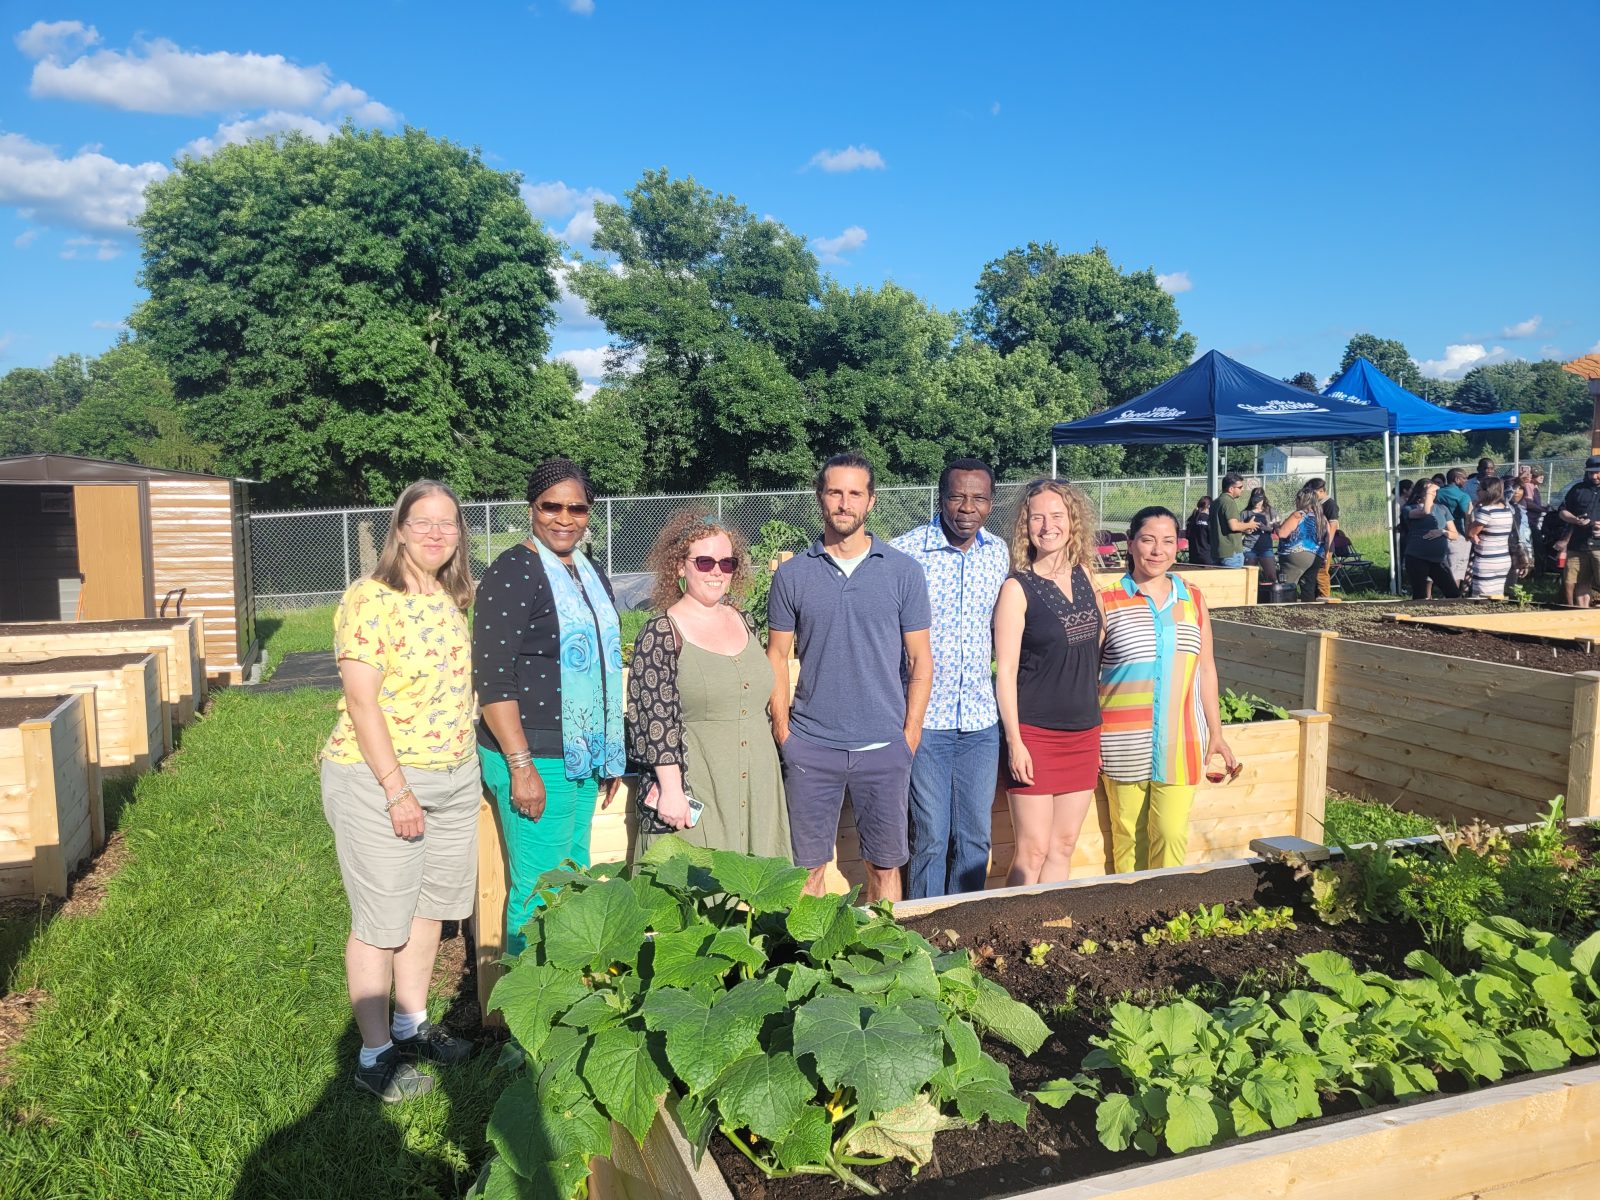 New garden aims to bring communities together